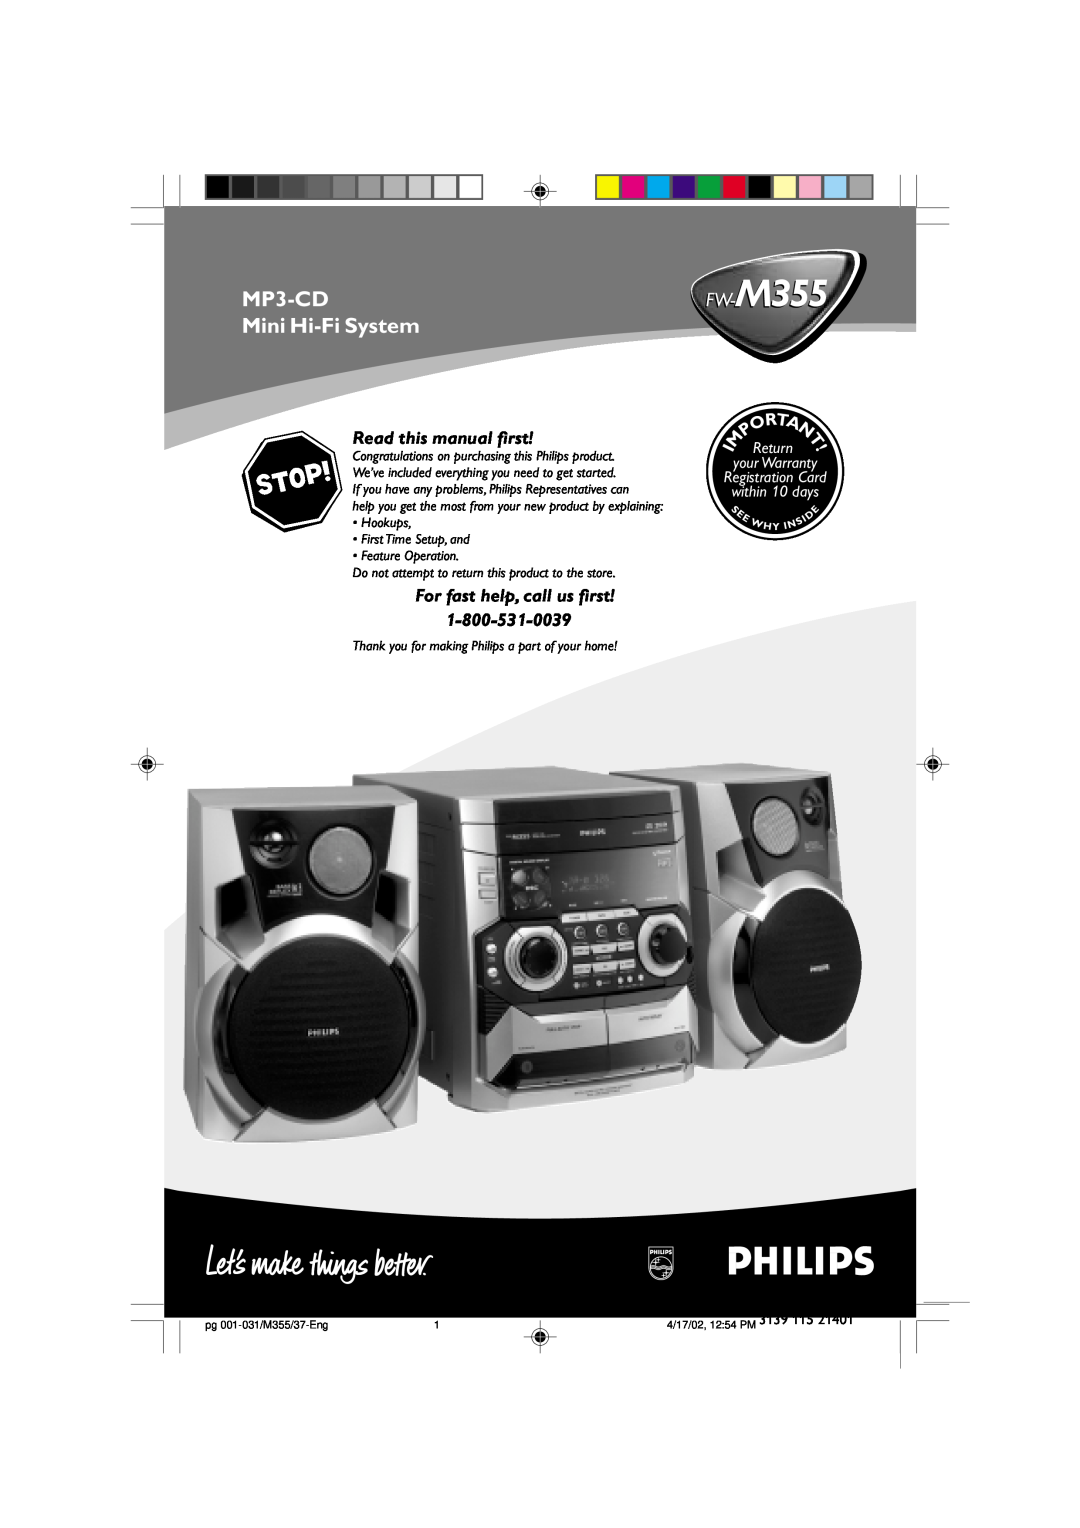 Philips M355 warranty MP3-CD, Mini Hi-FiSystem, your Warranty Registration Card within 10 days, Feature Operation, Return 